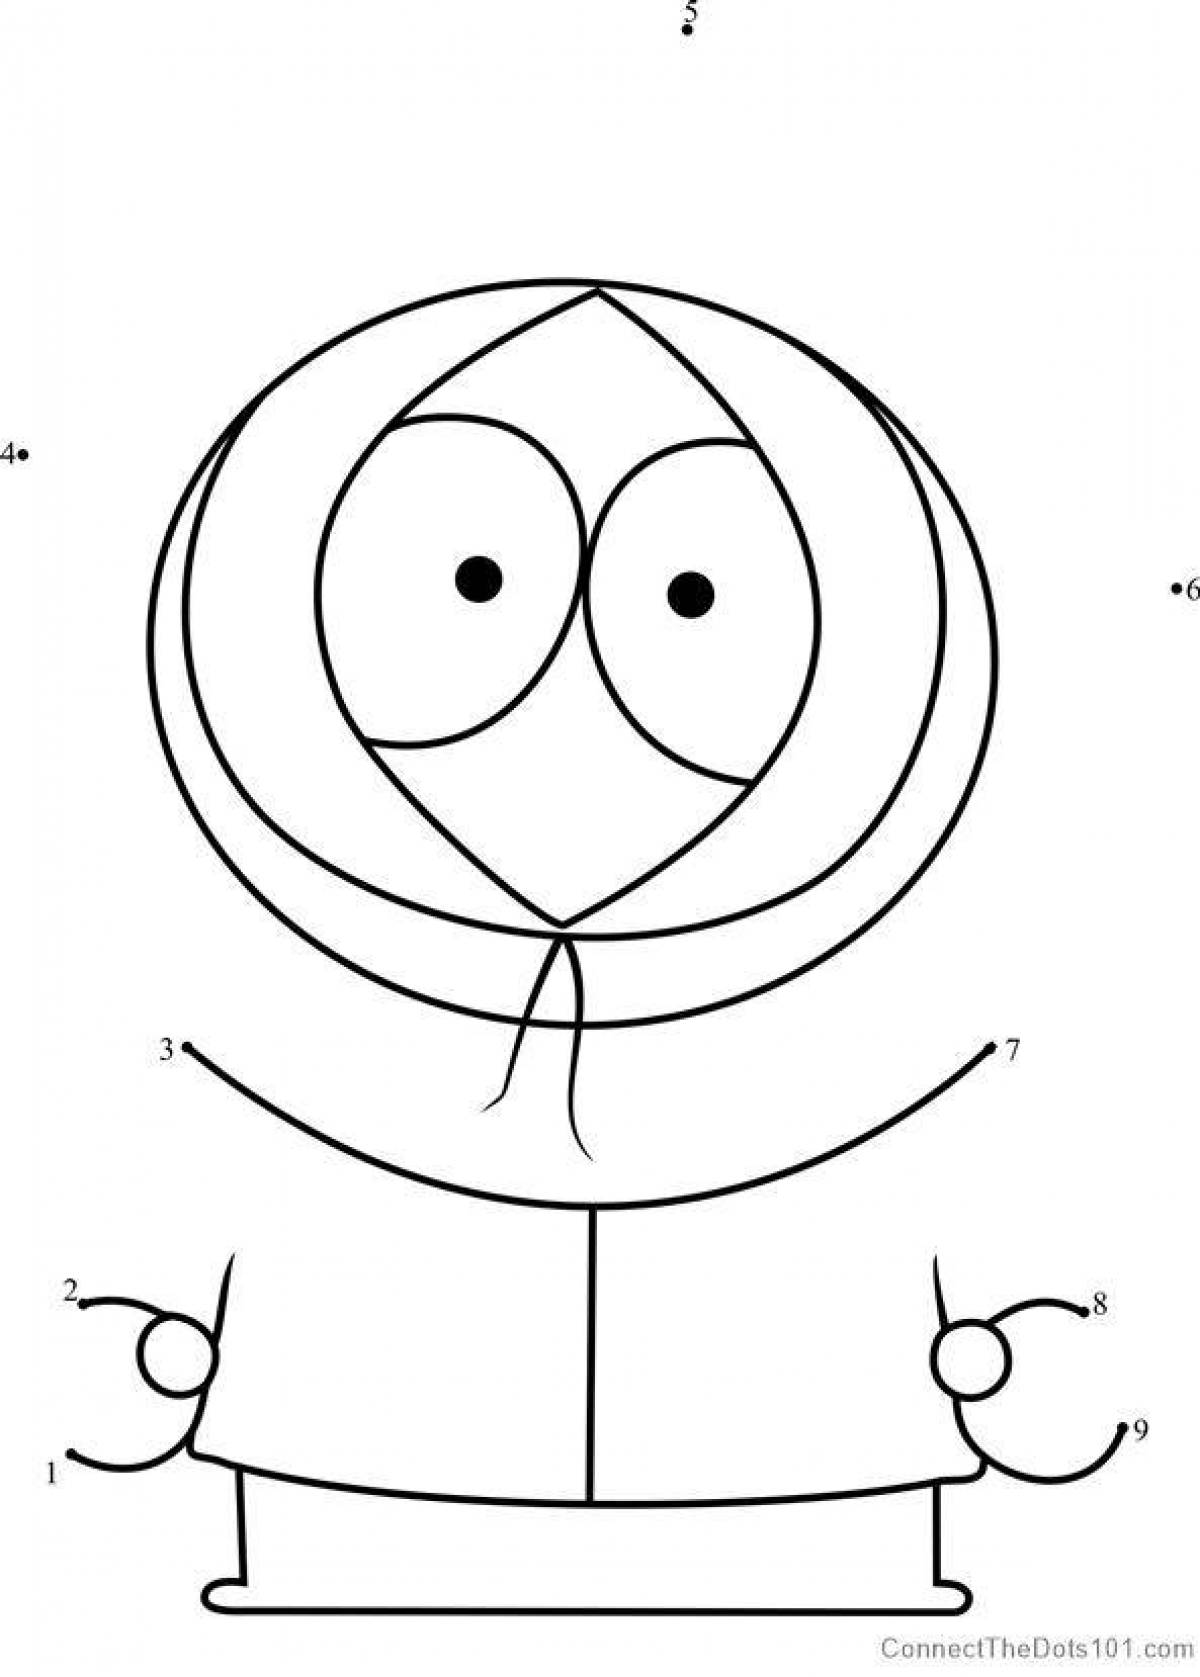 Kenny's bright coloring page